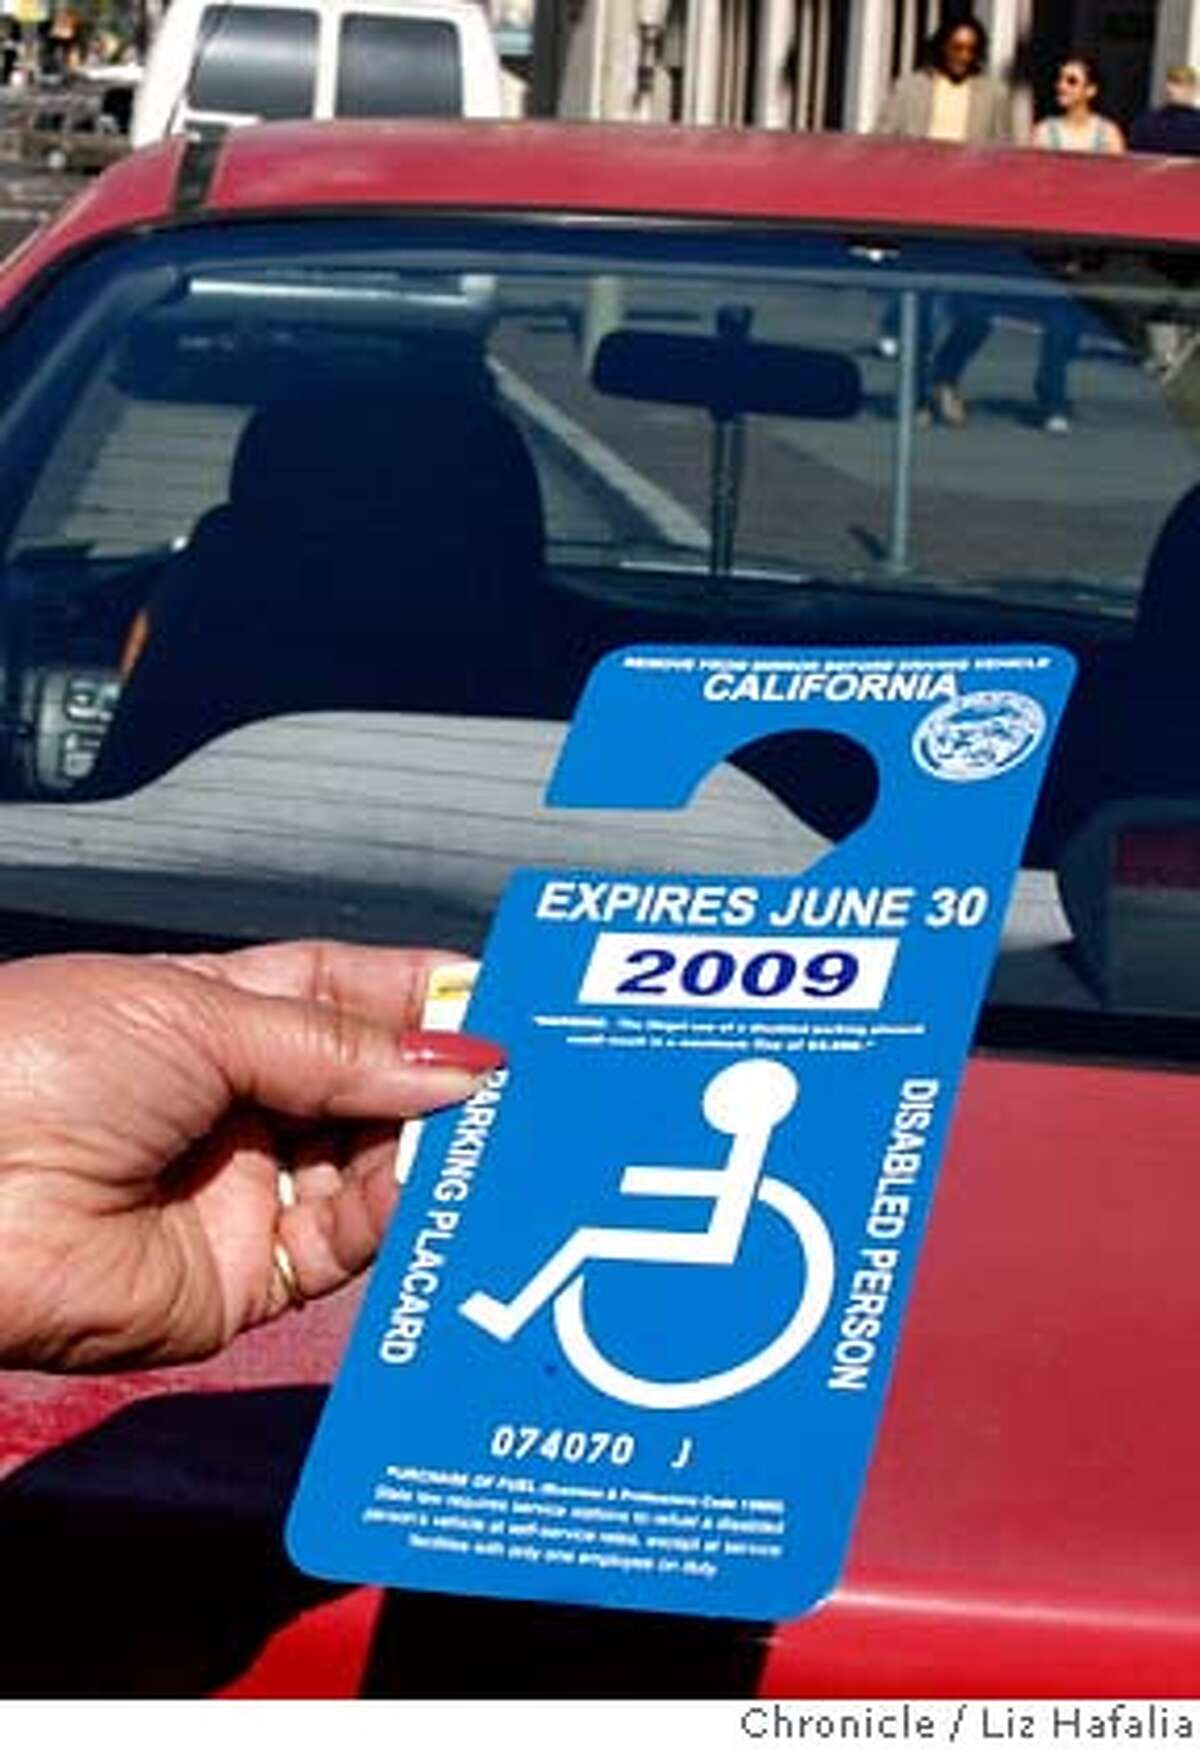 Disabled placards proliferate / As more qualify for privilege, more ...